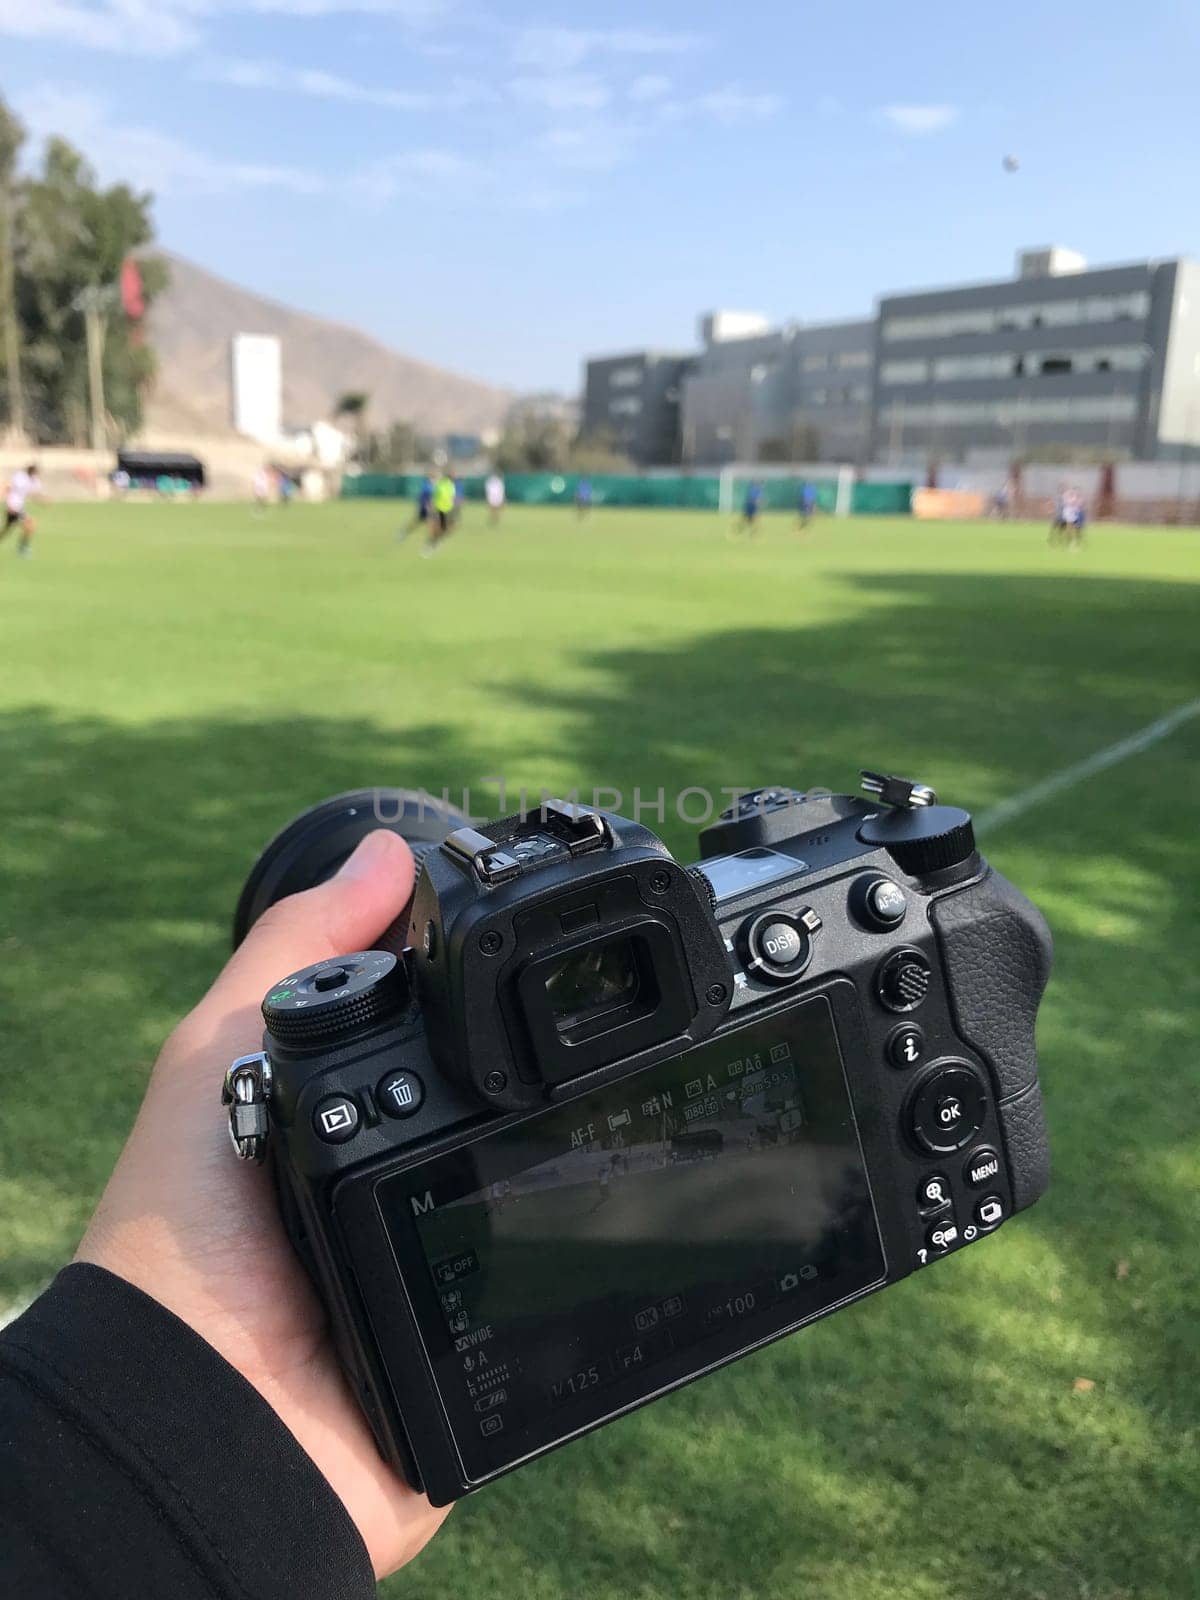 Close-up of a dslr camera in hand with a soccer match in the background